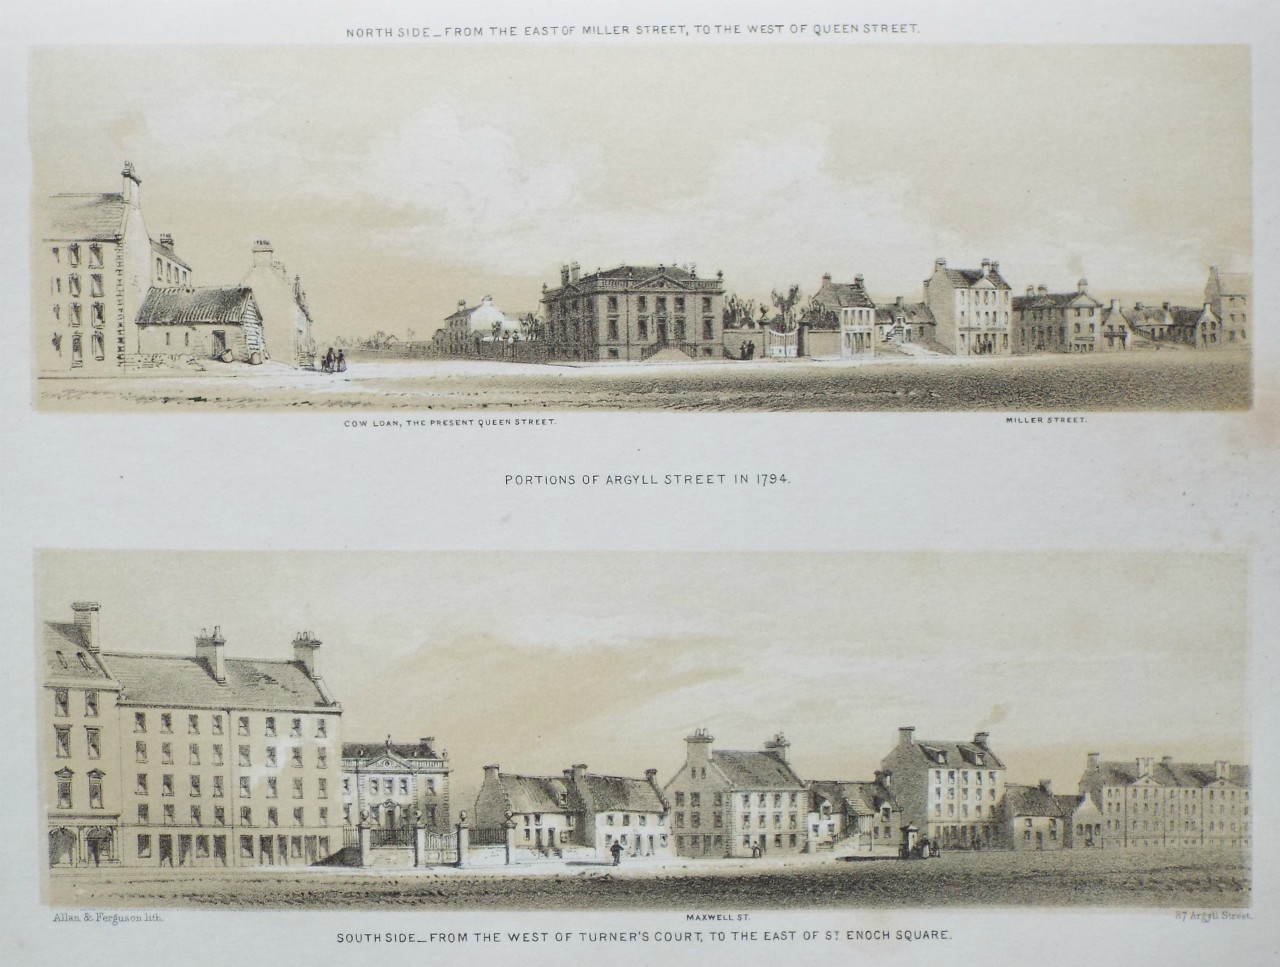 Lithograph - Portions of Argyll Street in 1794. 
Cow Loan, the Present Queen Street. 
South Side - from the West of Turner's Court, to the East of St. Enoch Square. - Allan